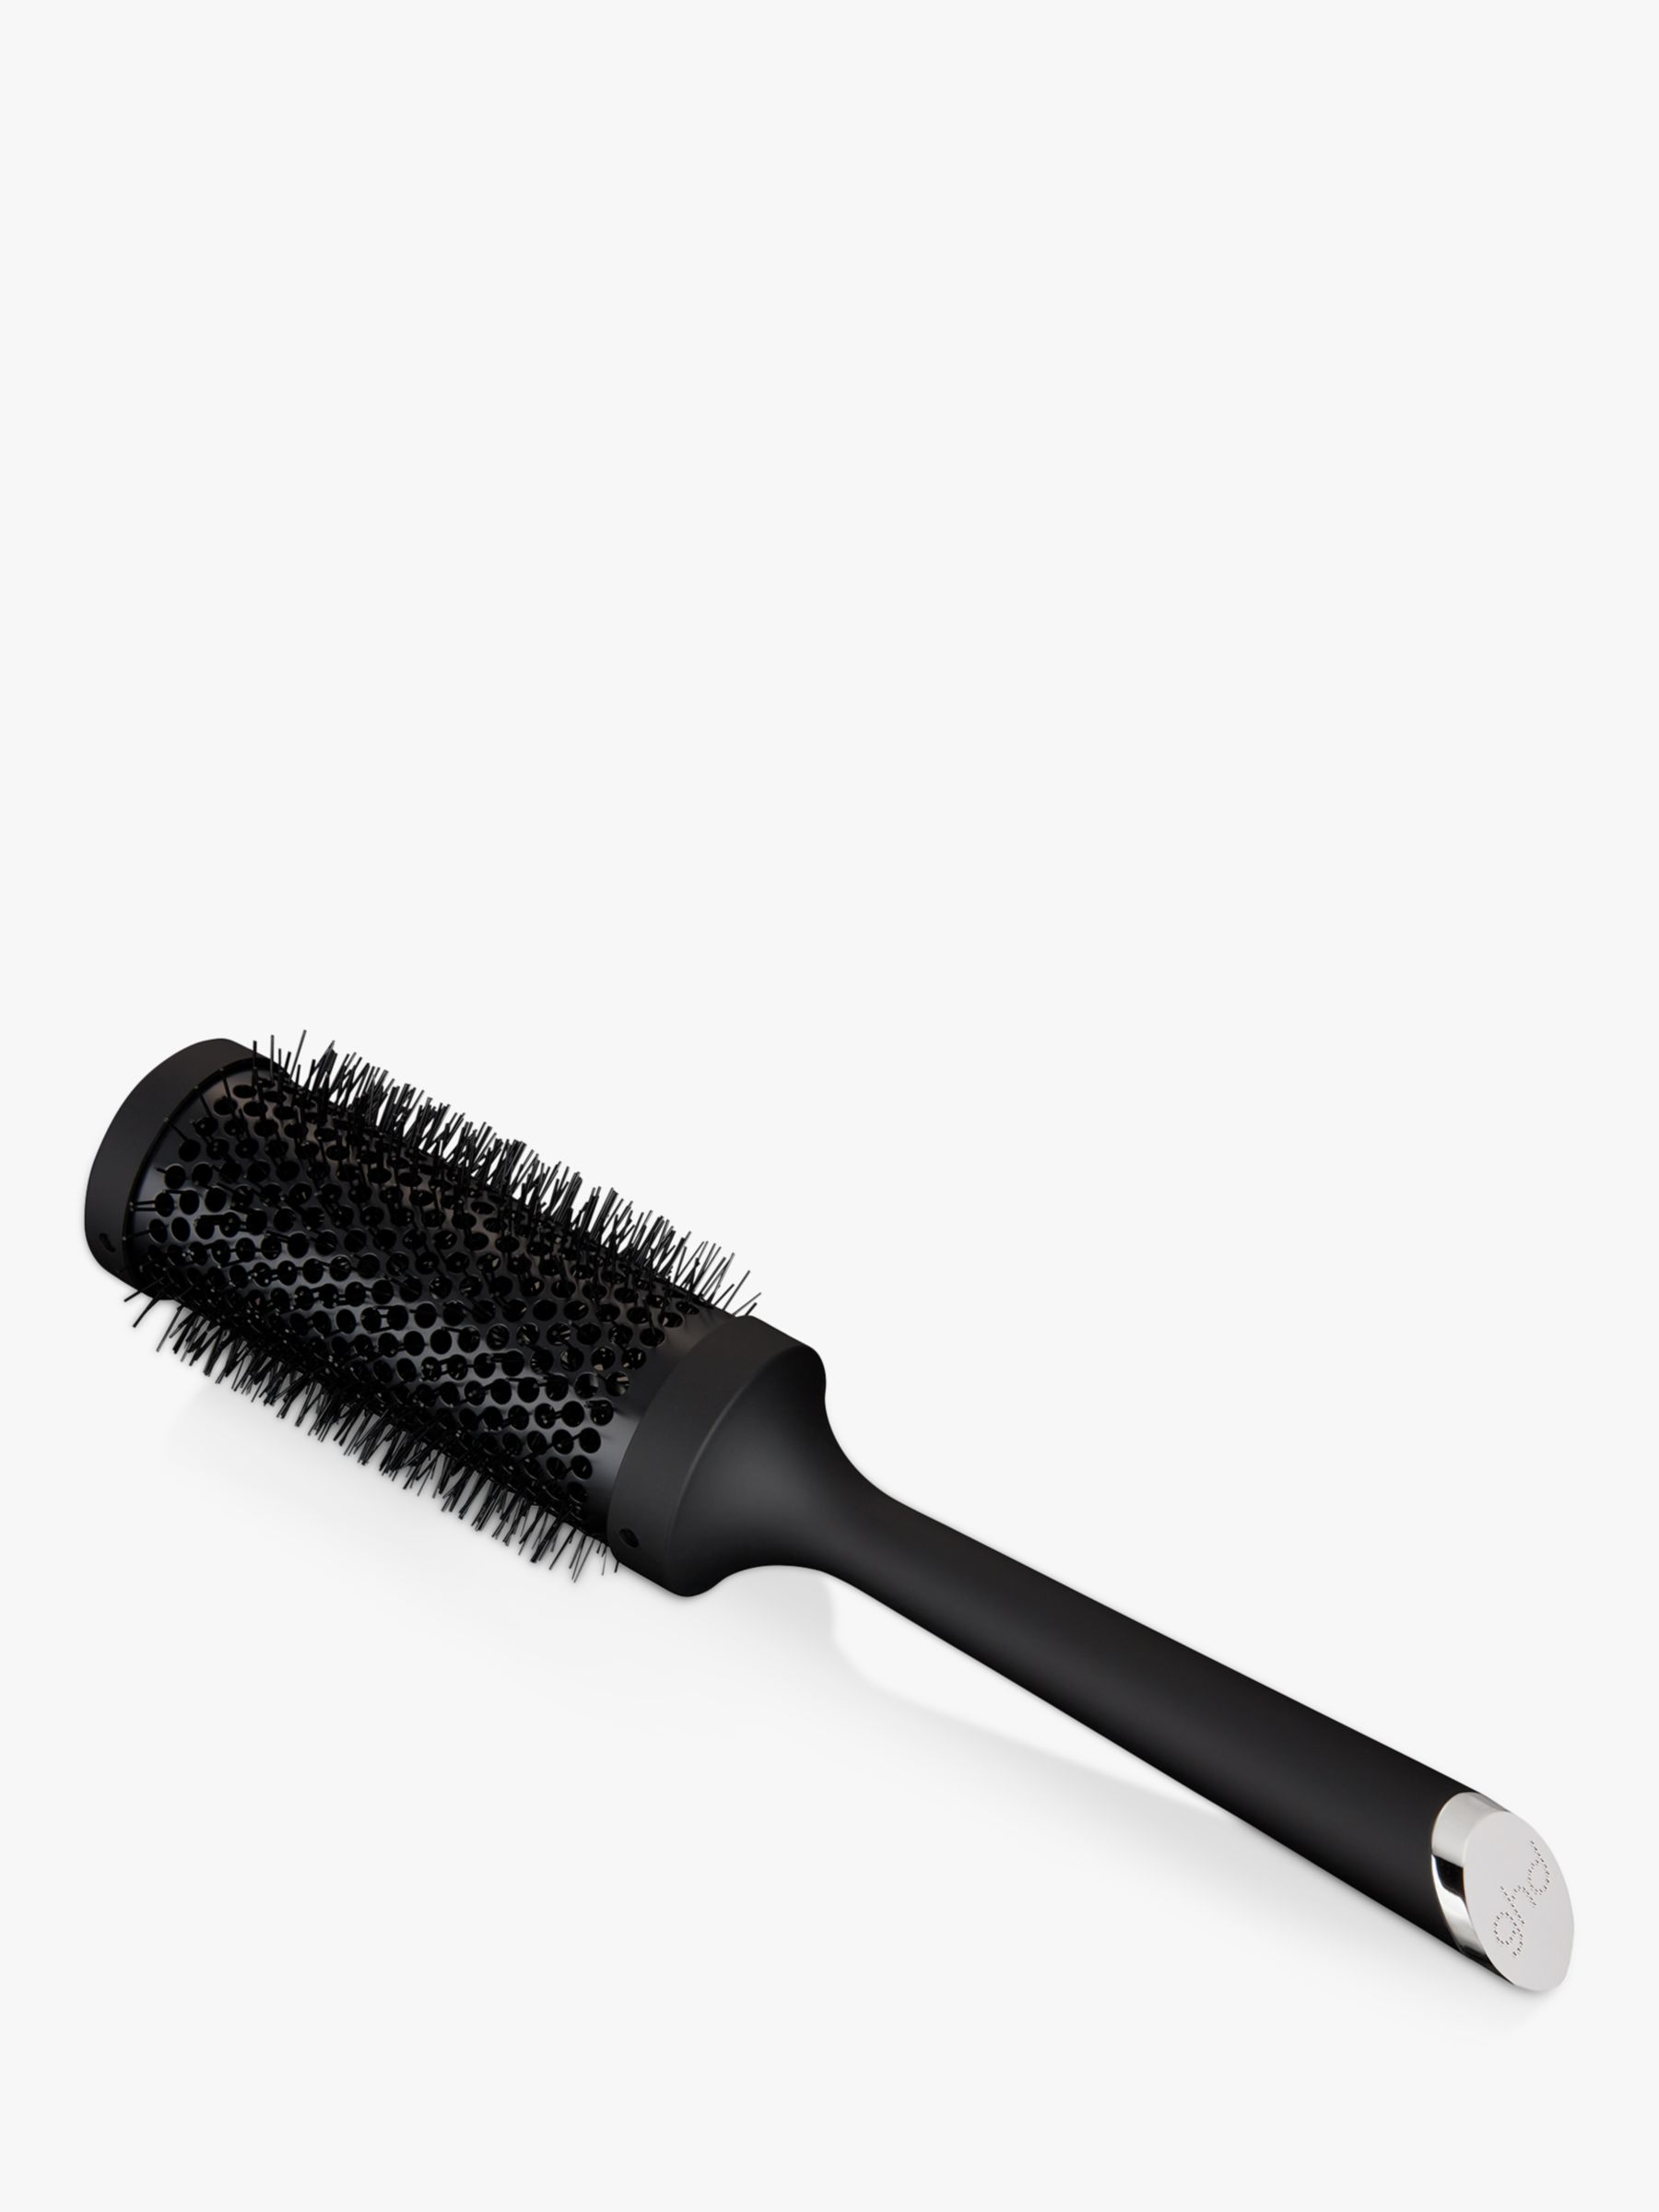 ghd The Blow Dryer Radial Hair Brush, Size 3, 45mm Barrel 1